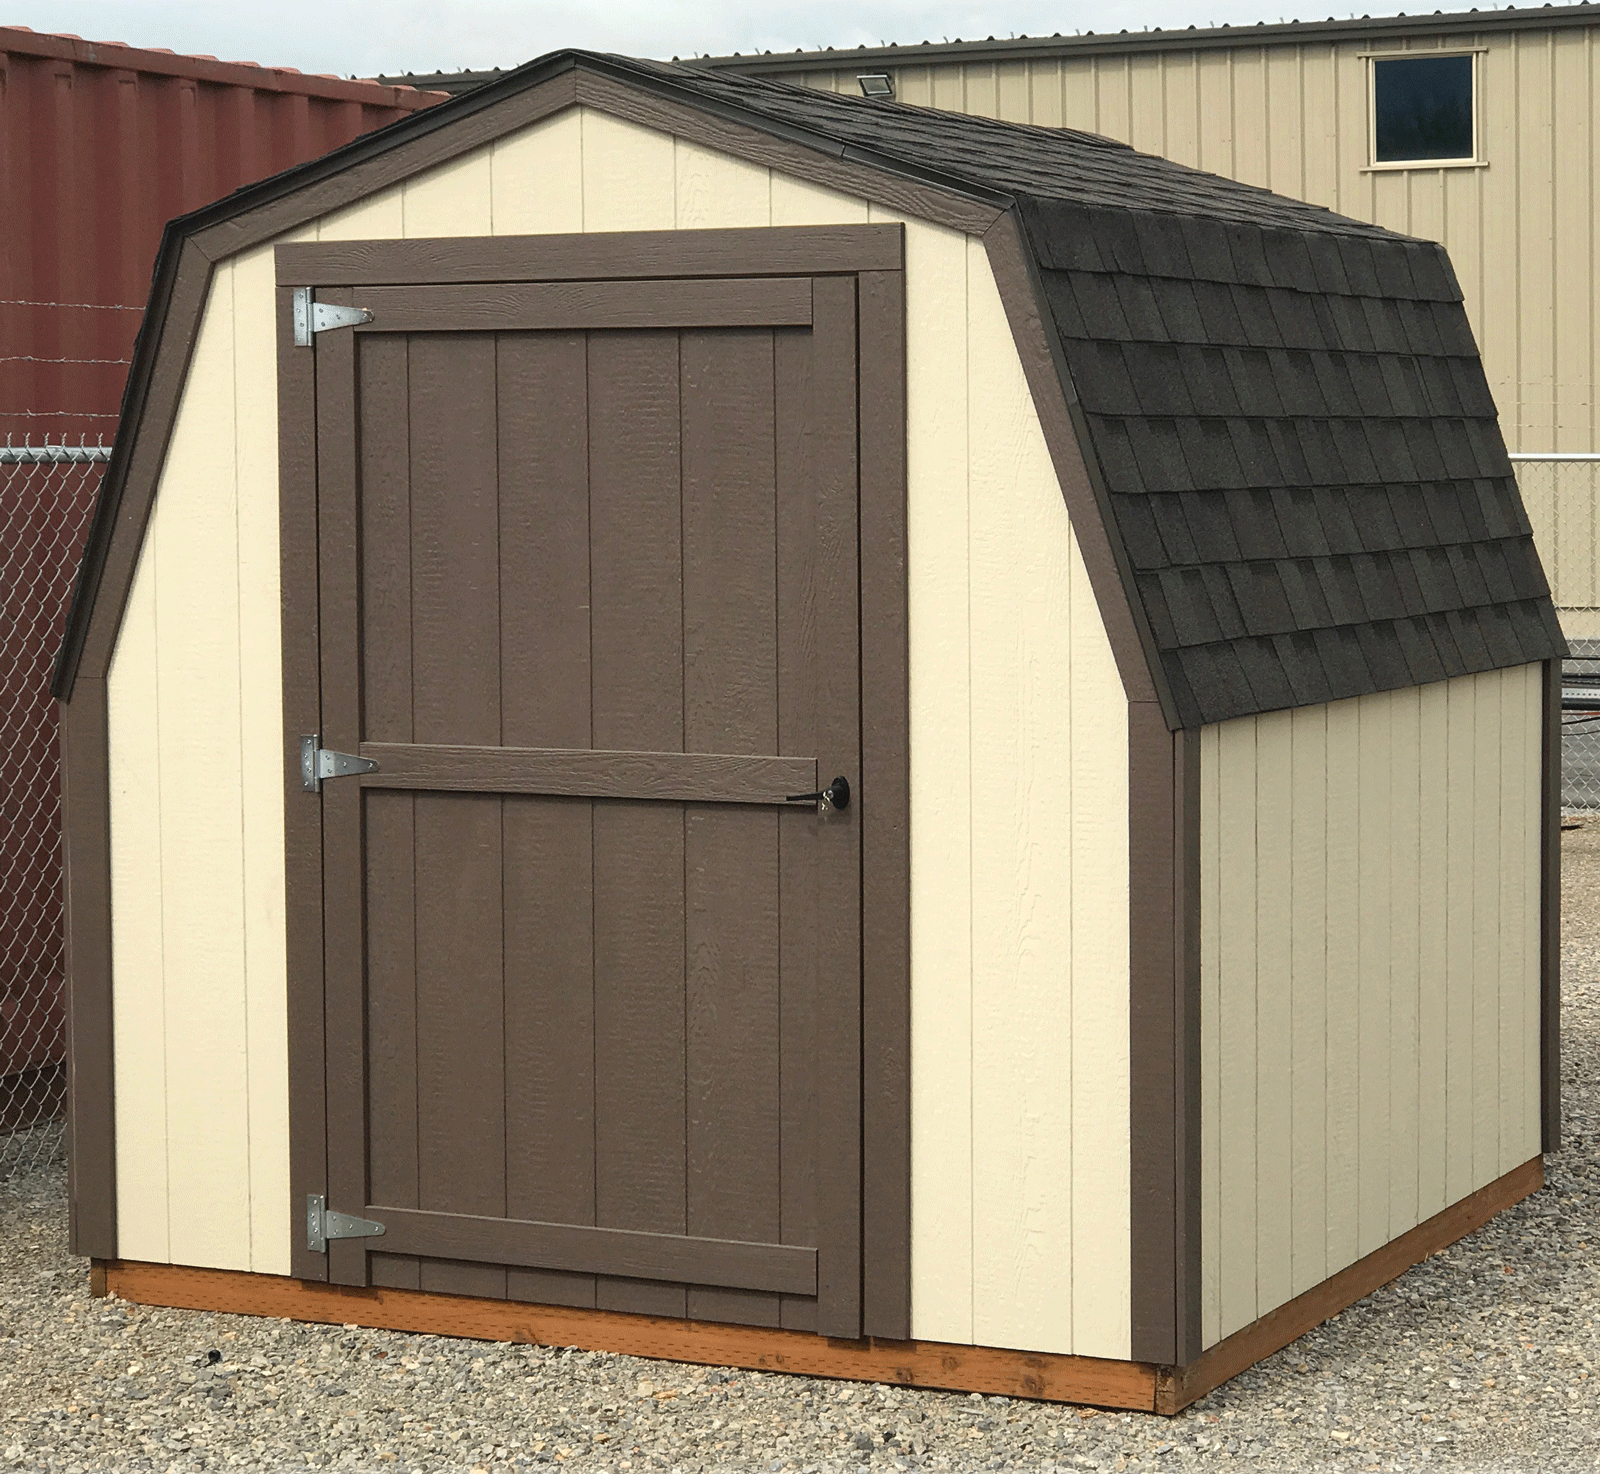 An 8 foot by 8 foot Mini Barn Style Shed